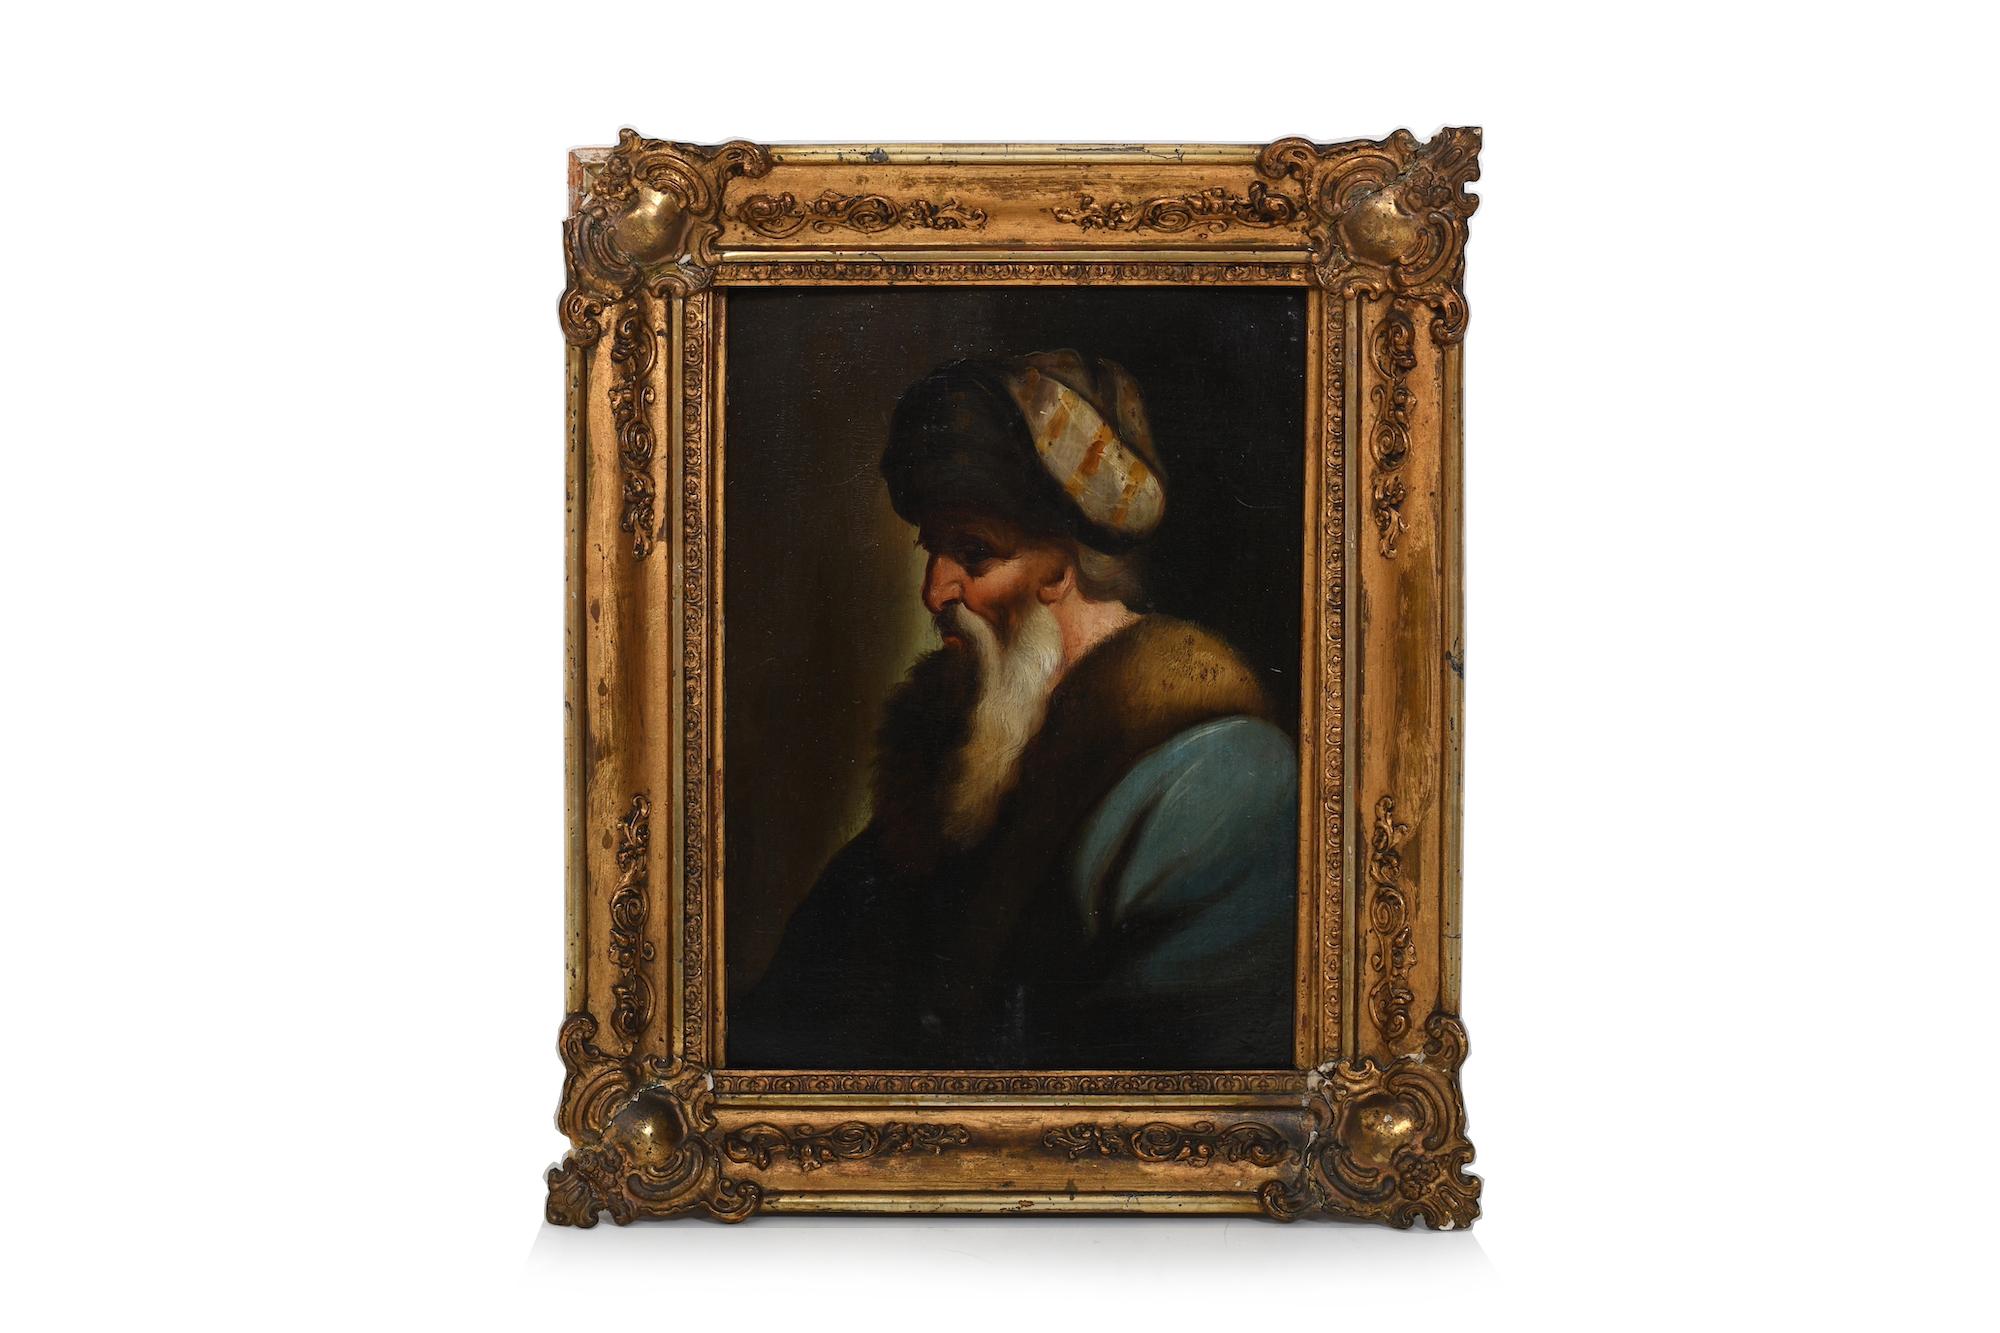 Original oilpainting on woodplate by the famous artist Christian Wilhelm Dietrich (Dietricy). Born in Weimar 1712, died in Dresden 1784. In original gilded baroque frame. 
H. 33.5 x W. 28.5
without frame: 24 cm x 18 cm